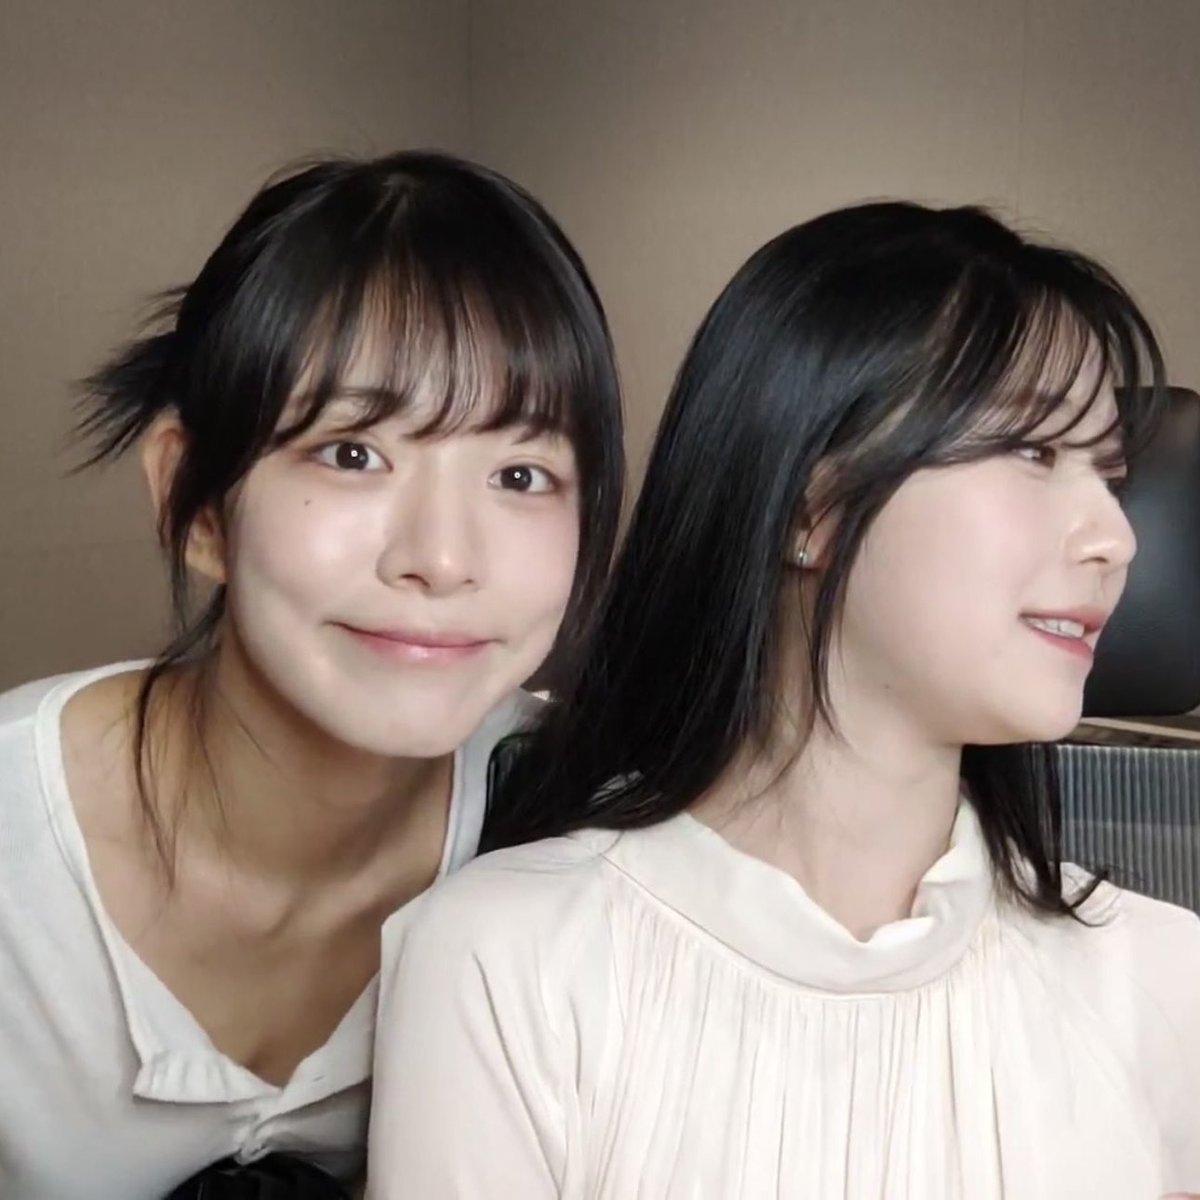 [🍀flover ONLY] 240417
fromis_9 Baek Jiheon Weverse Birthday Live (with Lee Chaeyoung)

#fromis_9 #프로미스나인 #flover_only #jiheon #baekjiheon #지헌 #백지헌 #leechaeyoung #chaeyoung #채영 #이채영